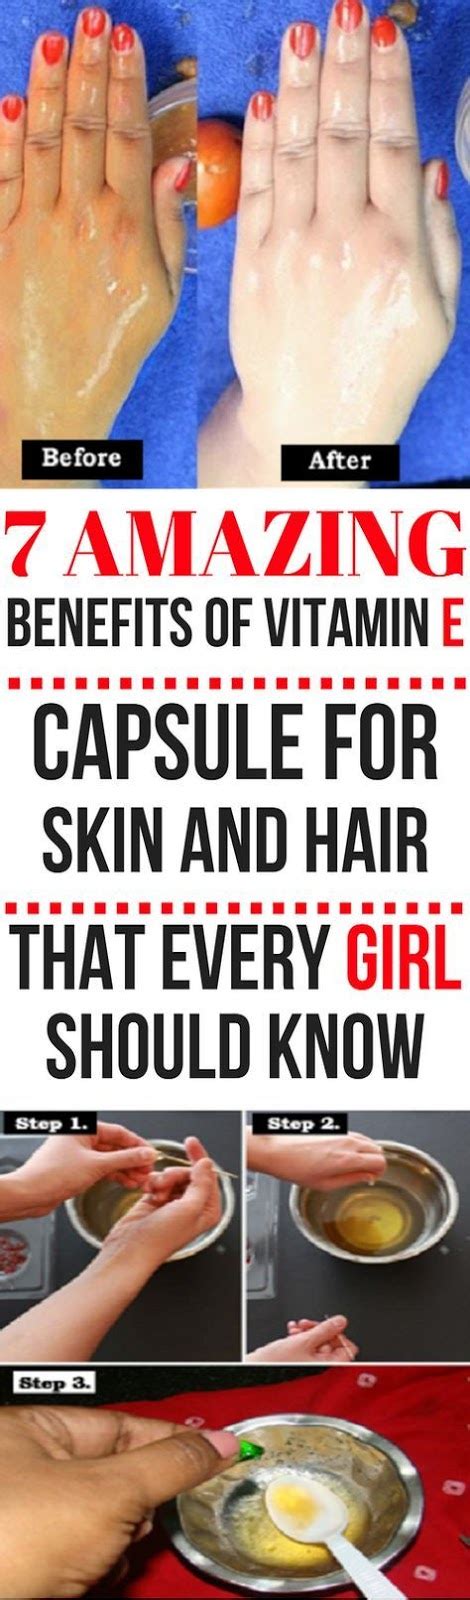 We did not find results for: 7 AMAZING BENEFITS OF VITAMIN E CAPSULE FOR SKIN AND HAIR ...